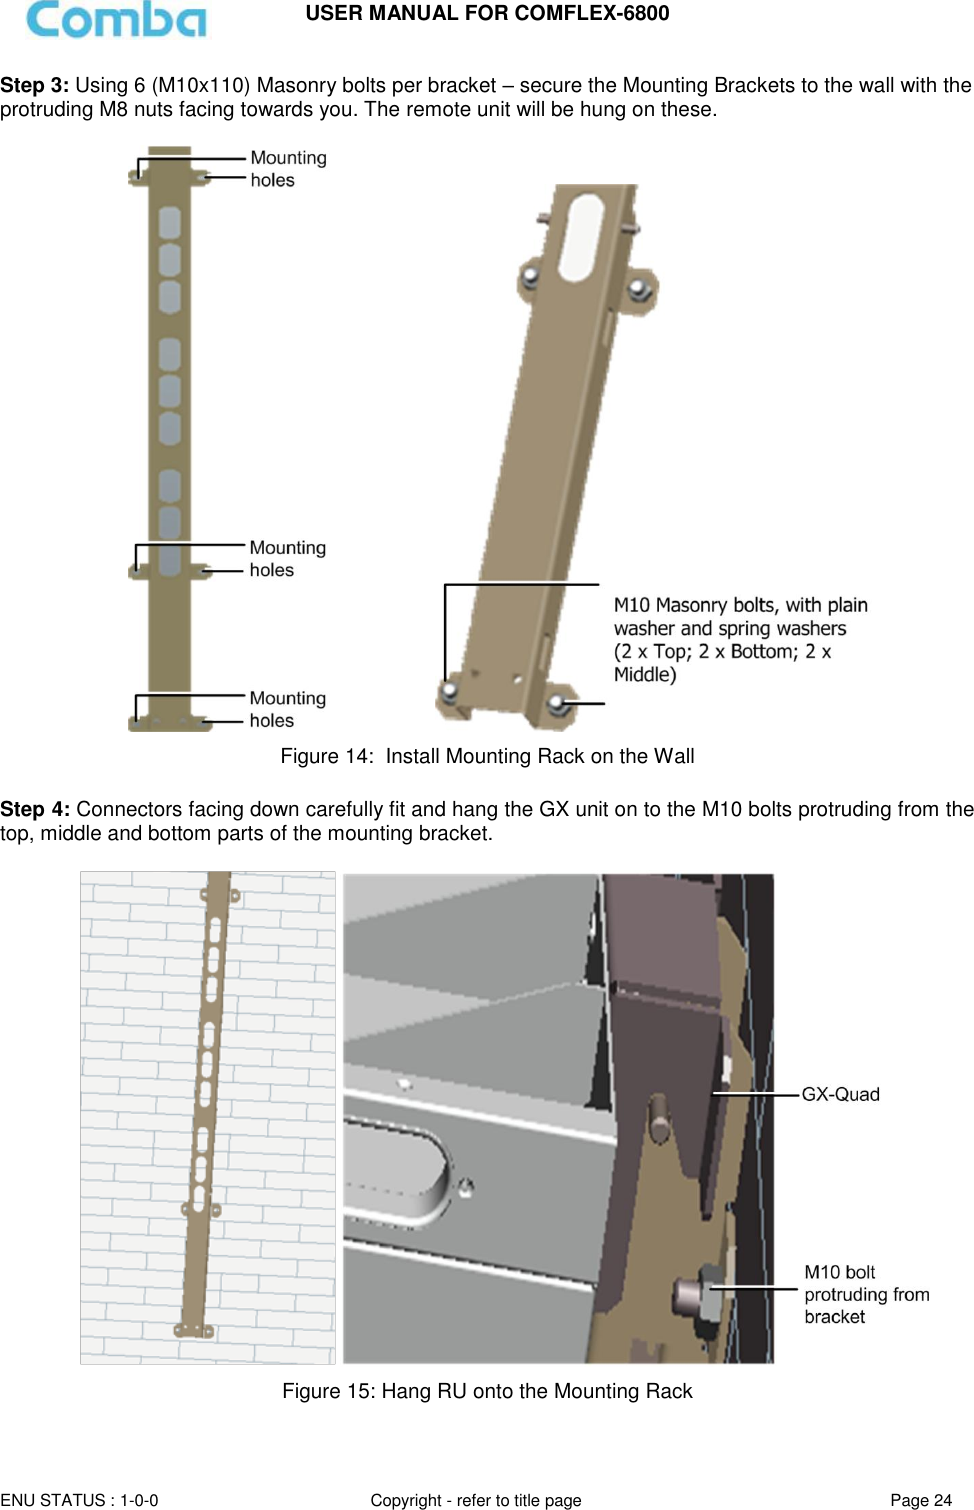 USER MANUAL FOR COMFLEX-6800  ENU STATUS : 1-0-0 Copyright - refer to title page Page 24  Step 3: Using 6 (M10x110) Masonry bolts per bracket – secure the Mounting Brackets to the wall with the protruding M8 nuts facing towards you. The remote unit will be hung on these.                             Figure 14:  Install Mounting Rack on the Wall  Step 4: Connectors facing down carefully fit and hang the GX unit on to the M10 bolts protruding from the top, middle and bottom parts of the mounting bracket.       Figure 15: Hang RU onto the Mounting Rack 